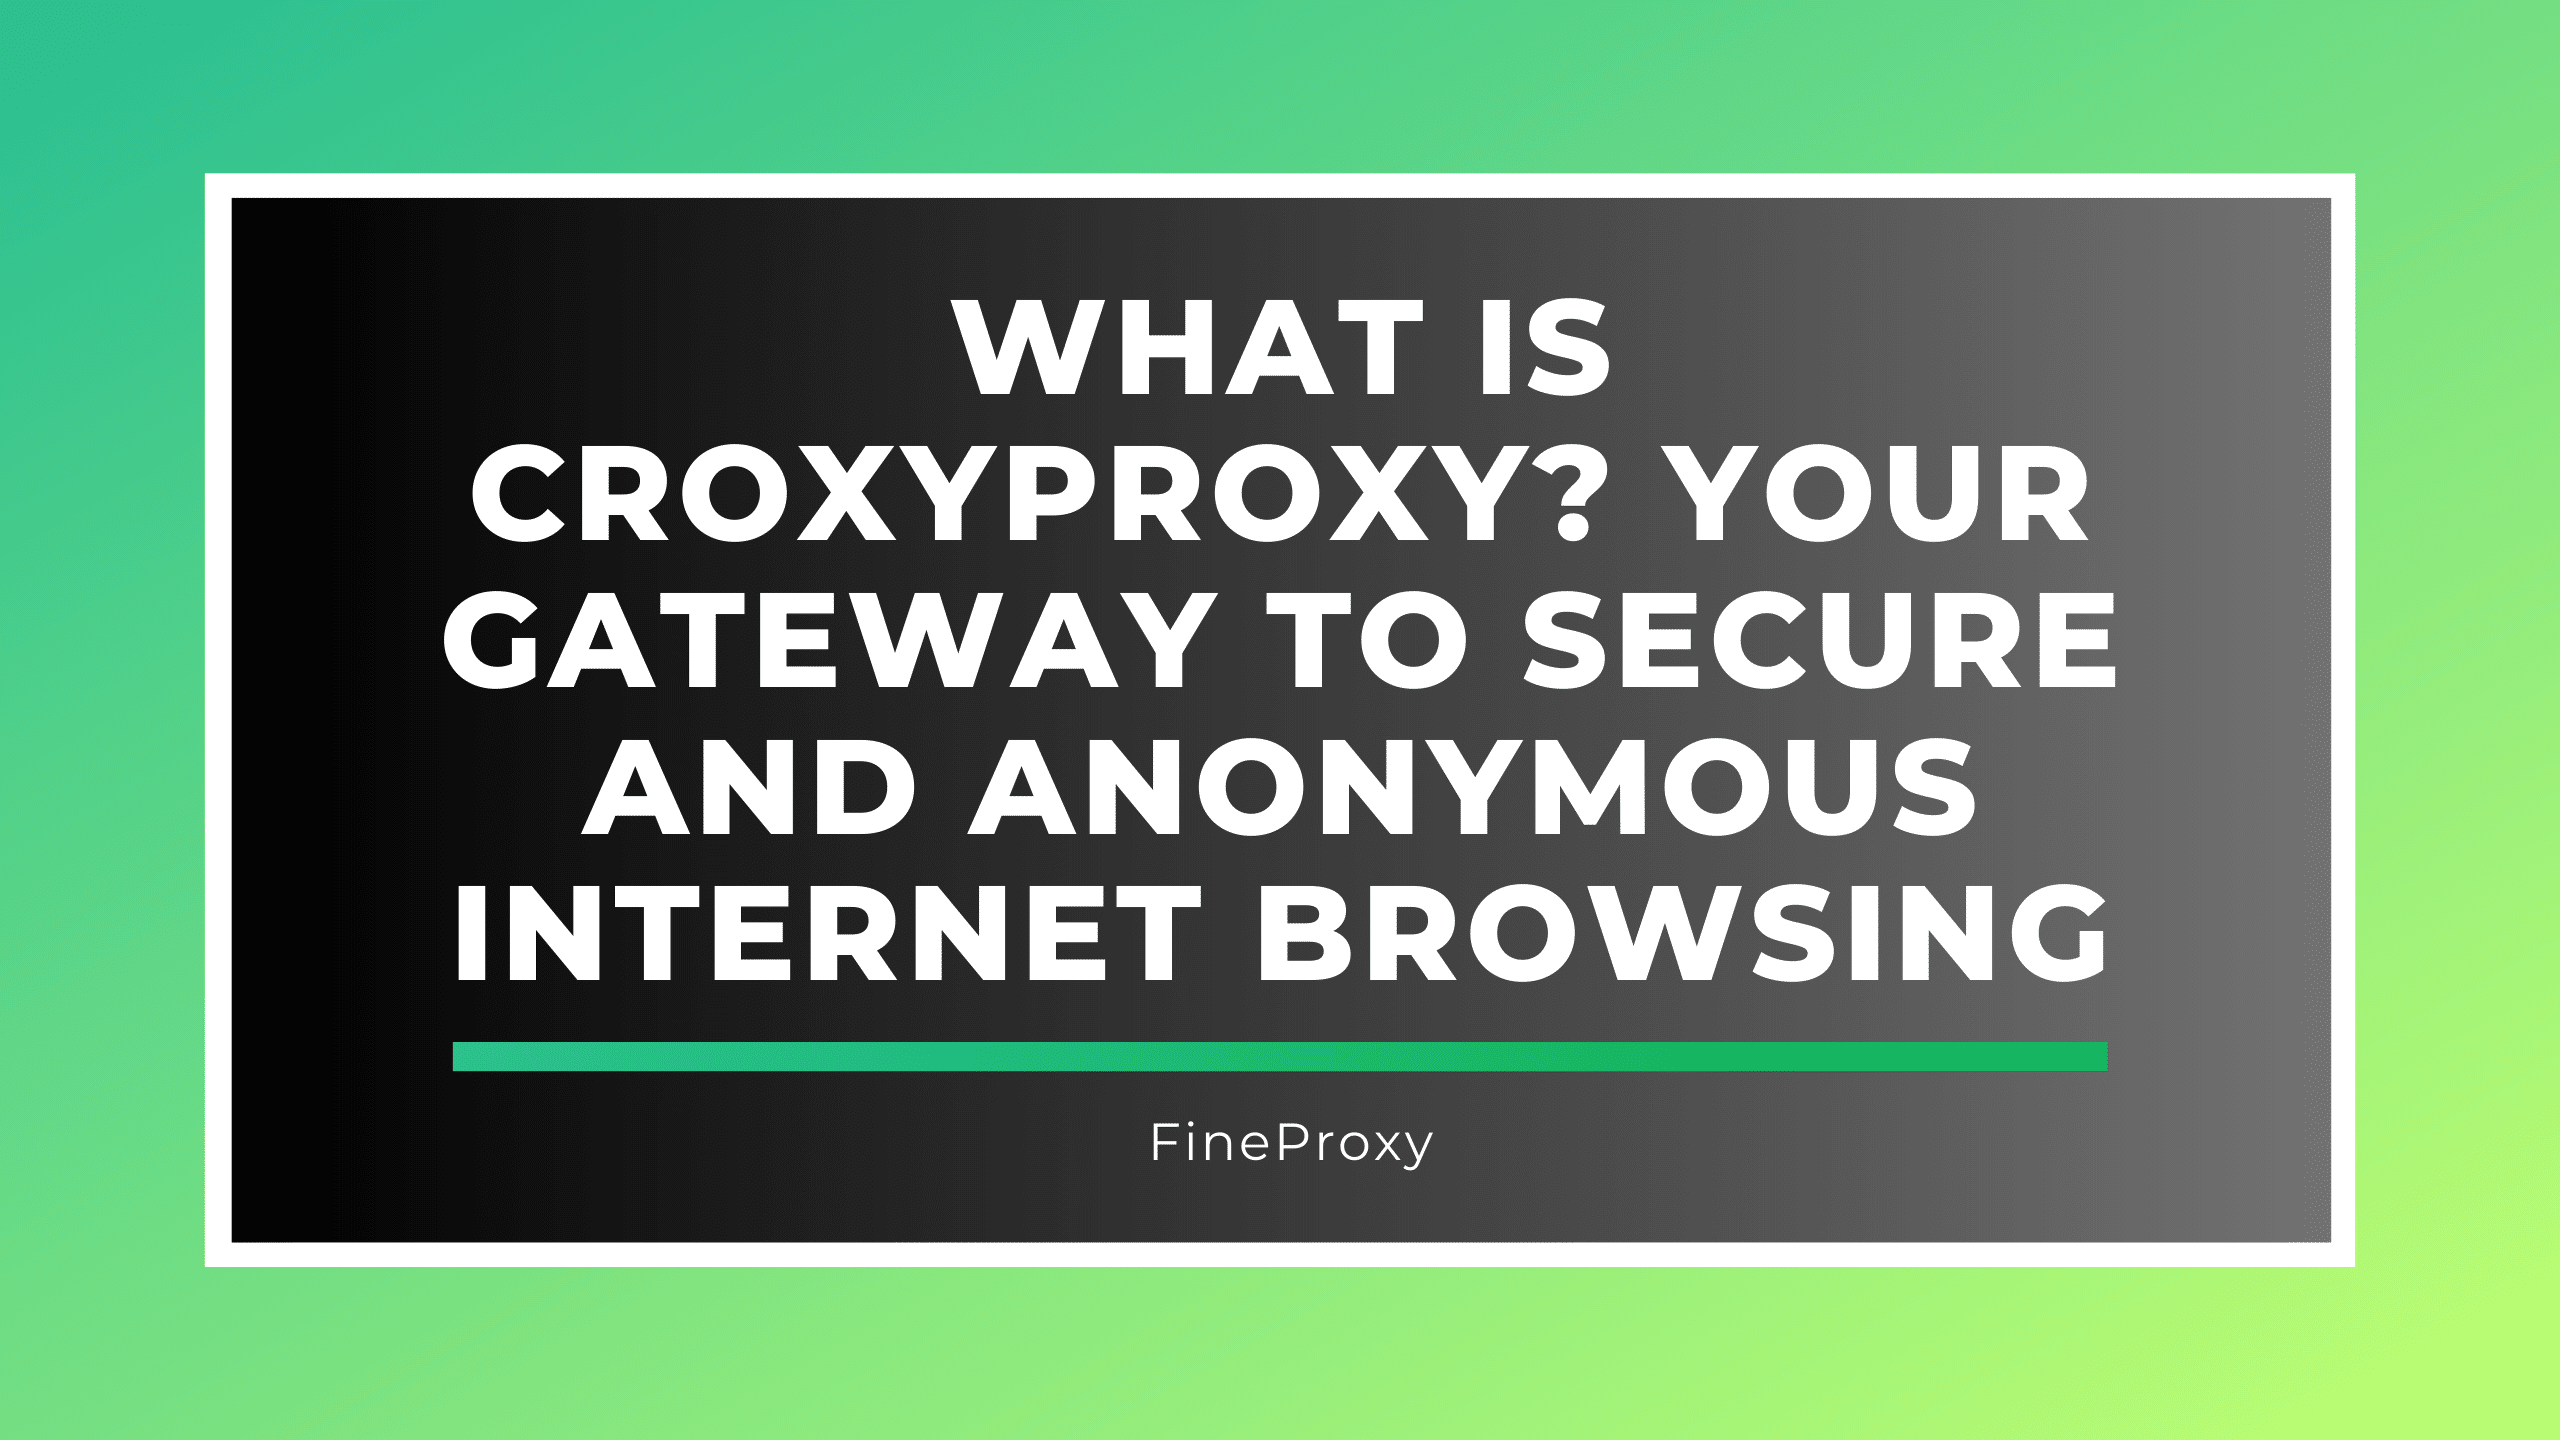 What is CroxyProxy? Your Gateway to Secure and Anonymous Internet Browsing